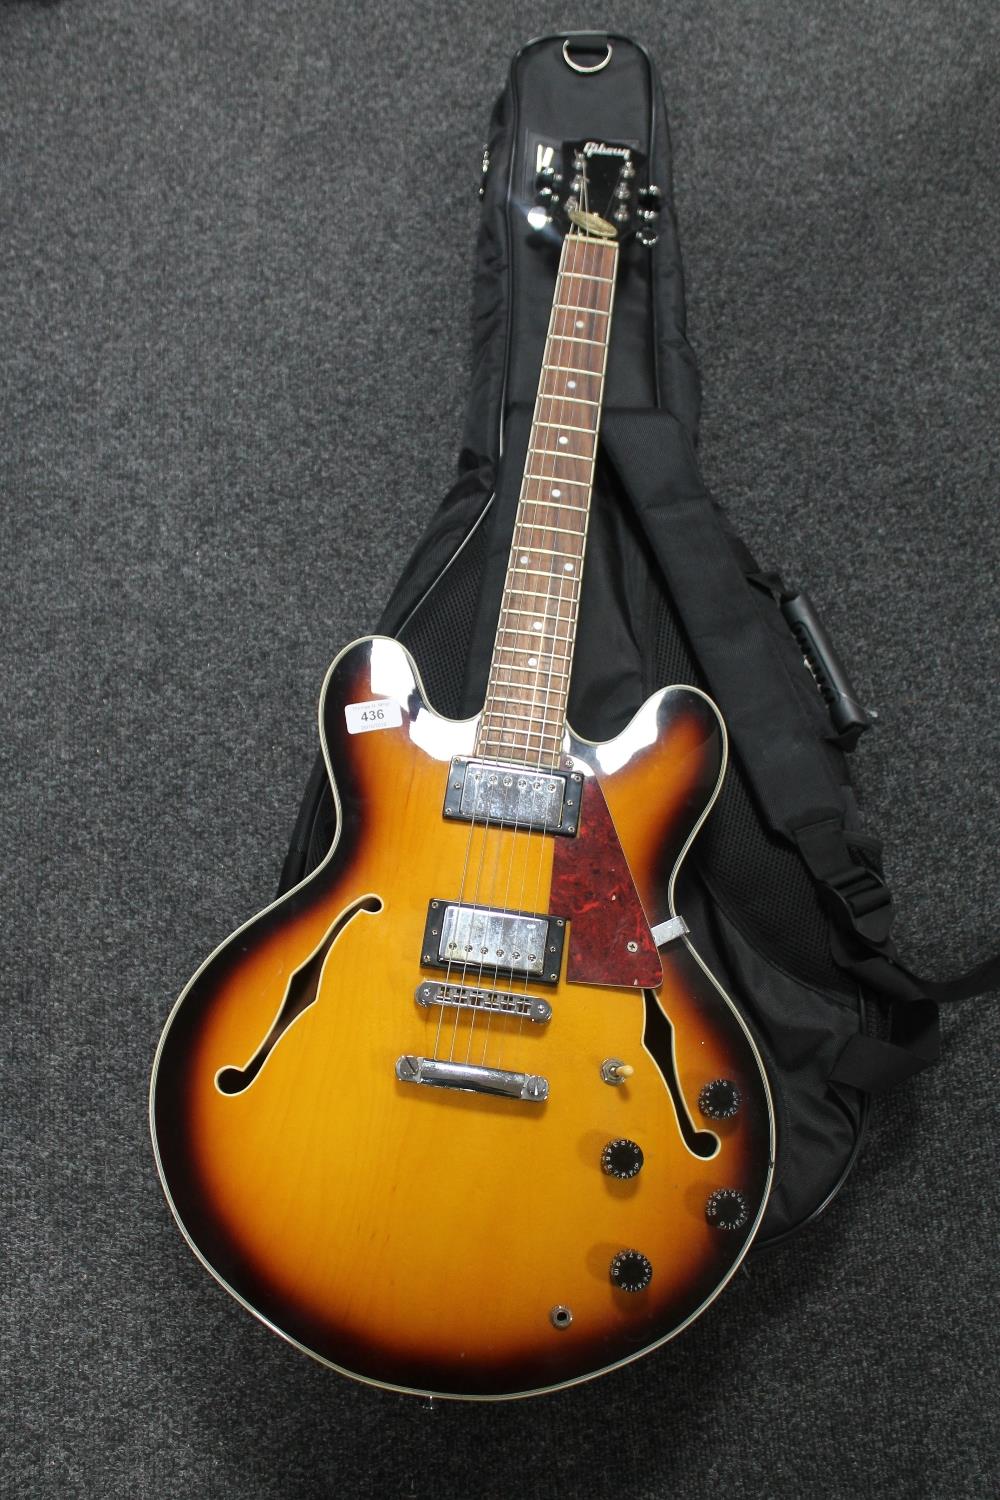 A copy of a Gibson electric guitar